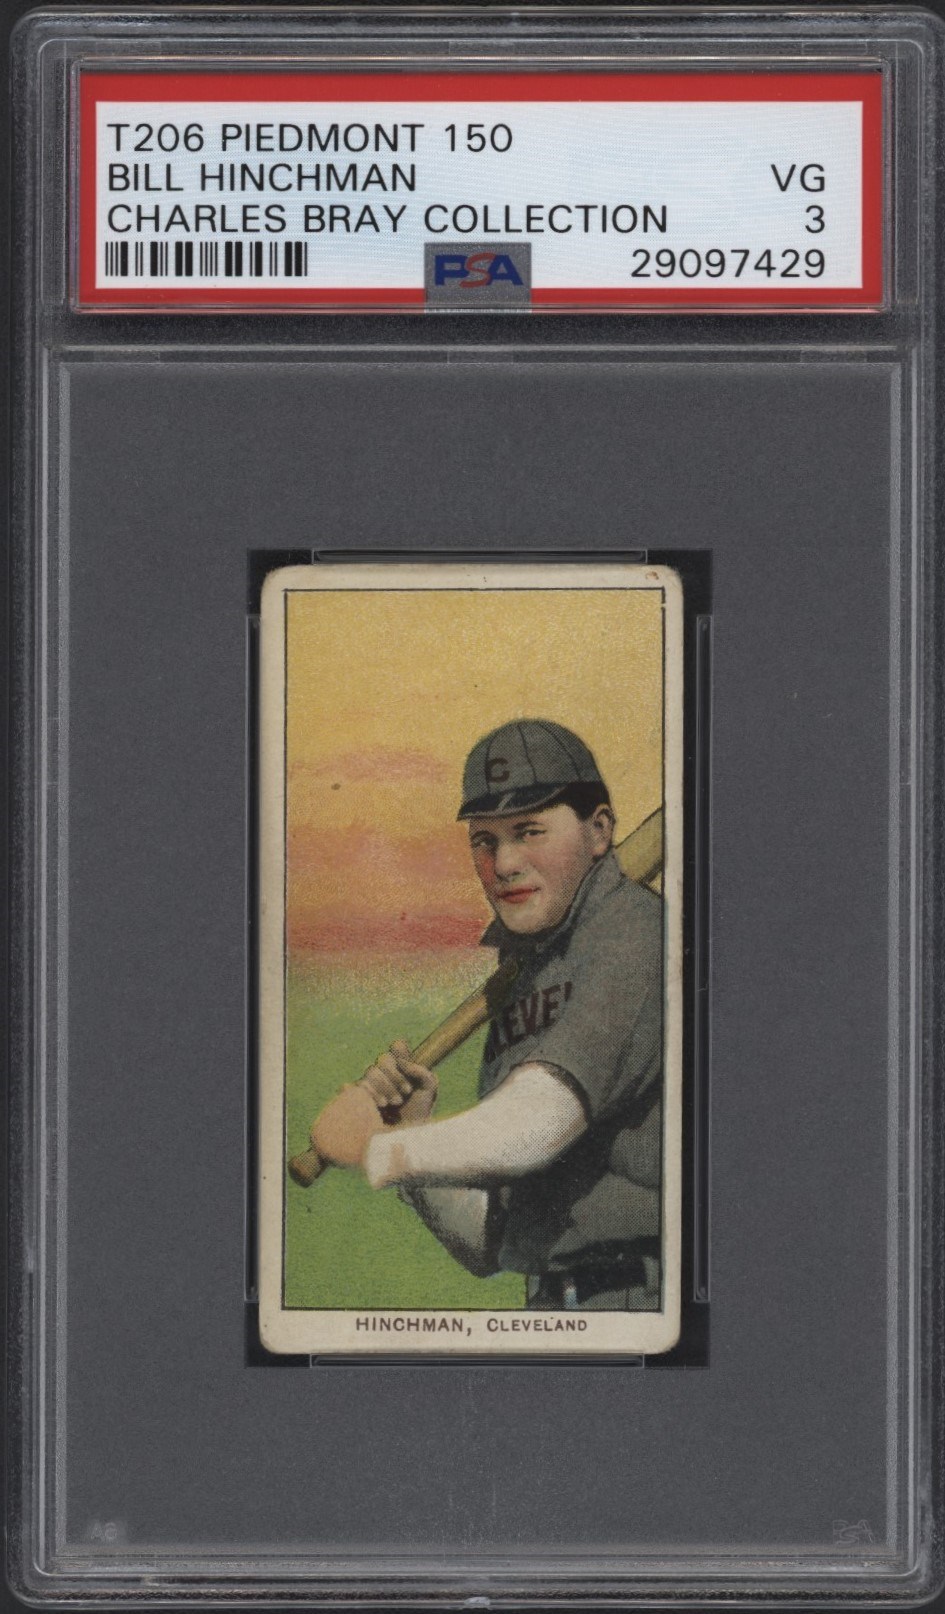 T206 Piedmont 150 Bill Hinchman PSA 3 From the Charles Bray Collection